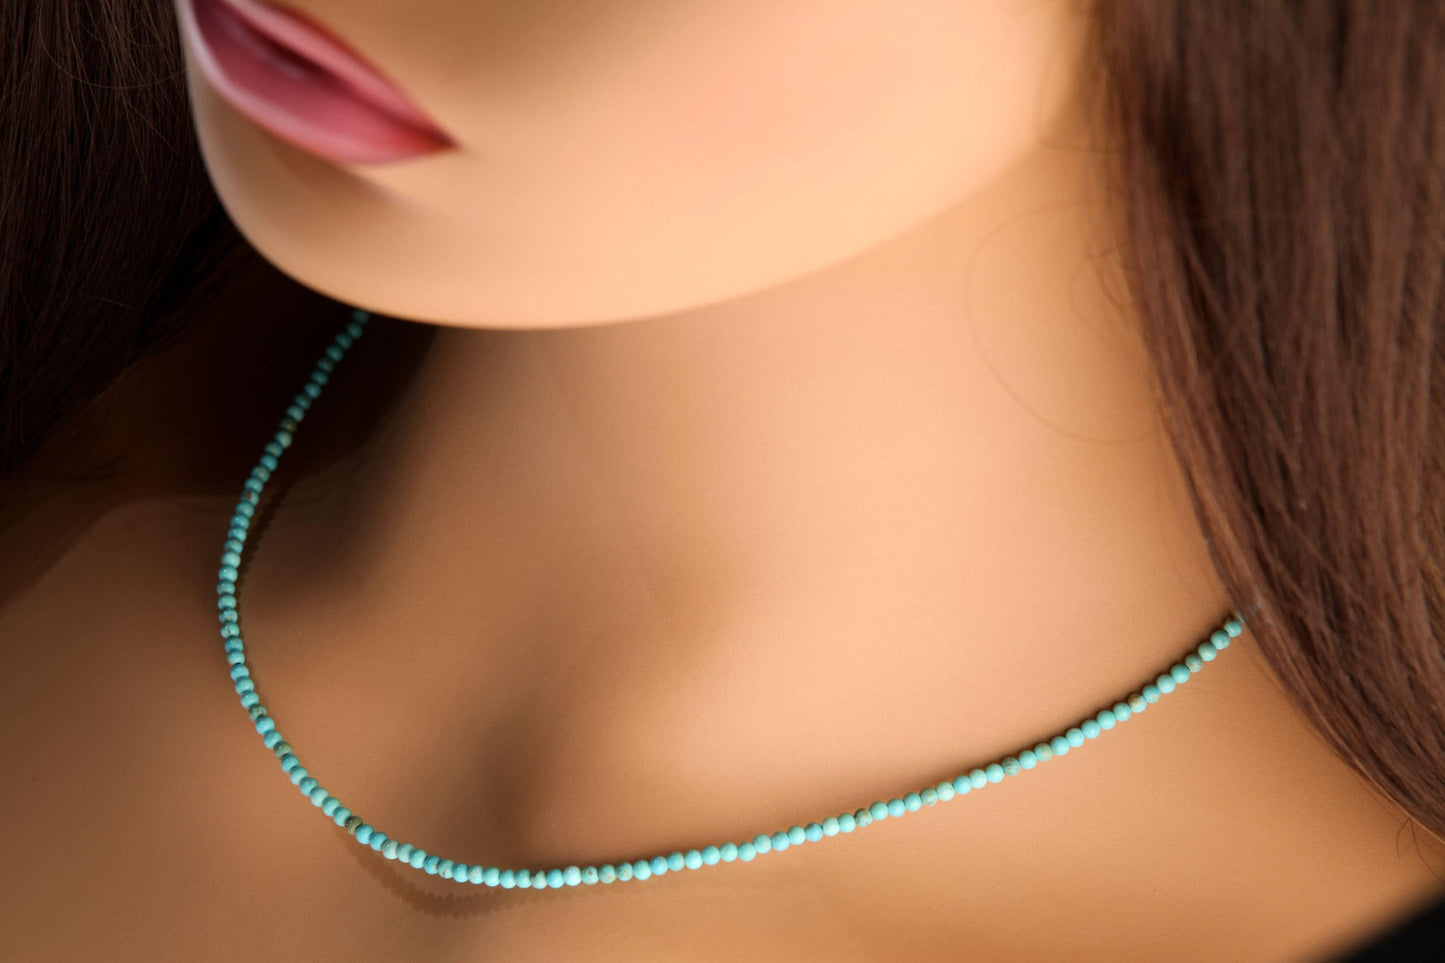 Genuine Blue Turquoise 2-2.5mm Smooth Round Choker Hand Made Necklace in 925 Sterling Silver, December Birth Stone, Man or Woman gifts